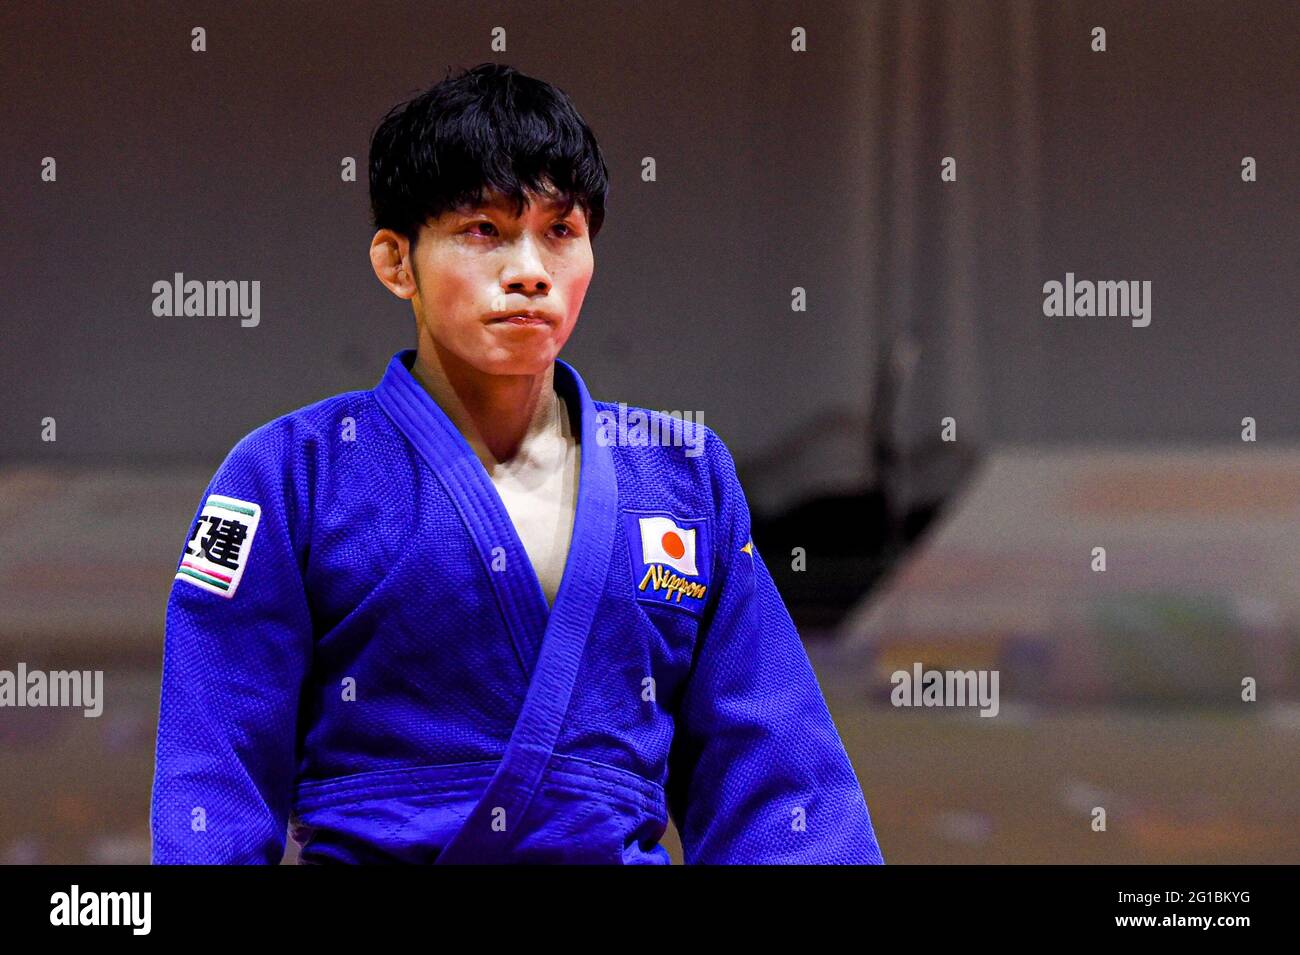 BUDAPEST, HUNGARY - JUNE 6: Genki Koga of Japan during the World Judo Championships Hungary 2021 at Papp Laszlo Budapest Sports Arena on June 6, 2021 in Budapest, Hungary (Photo by Yannick Verhoeven/Orange Pictures) Stock Photo